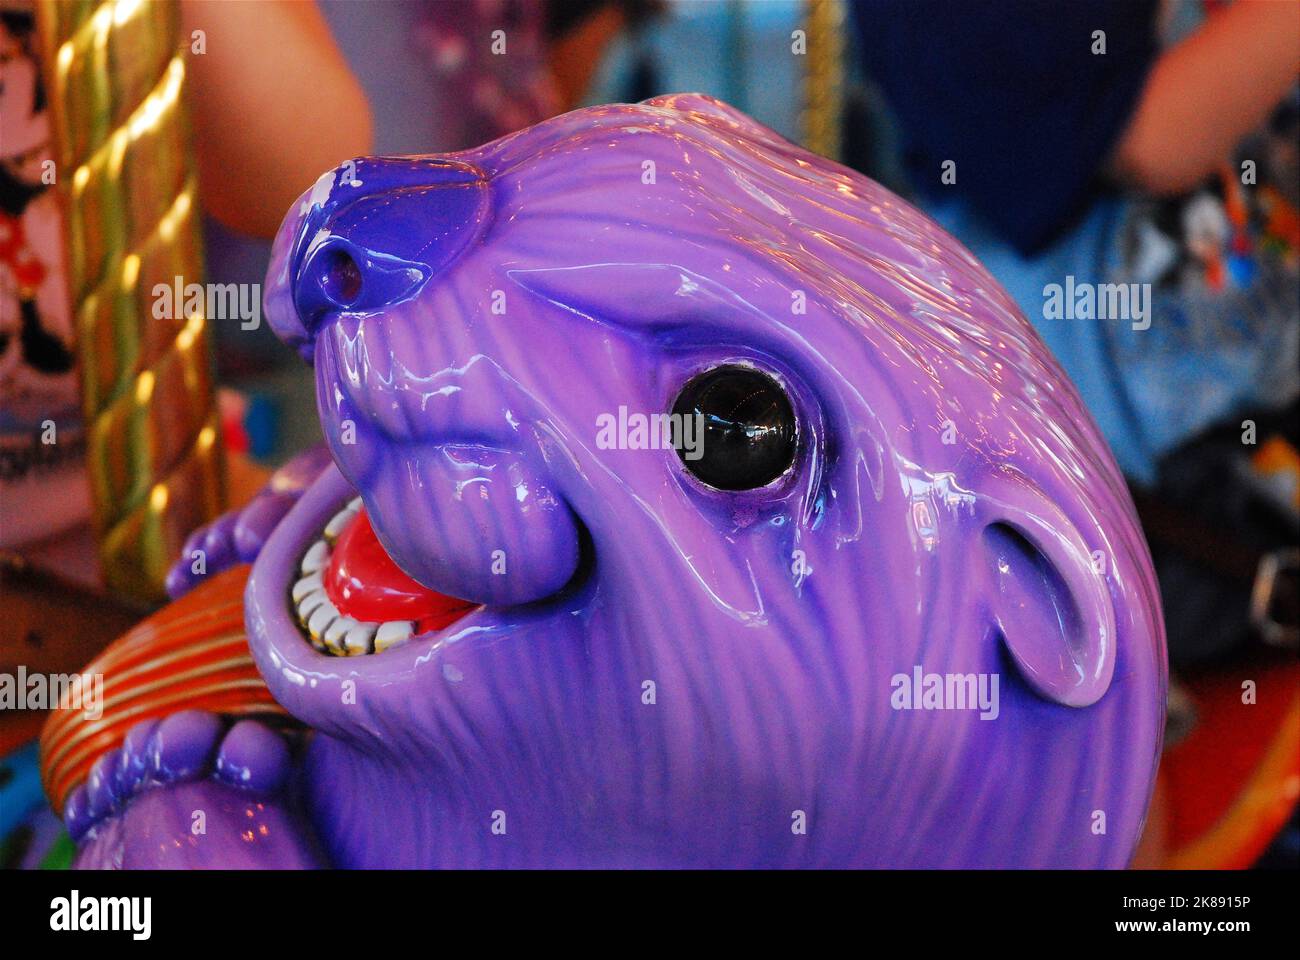 A purple seal is one of several animals on a merry go round carousel at Disney's California Adventure Stock Photo